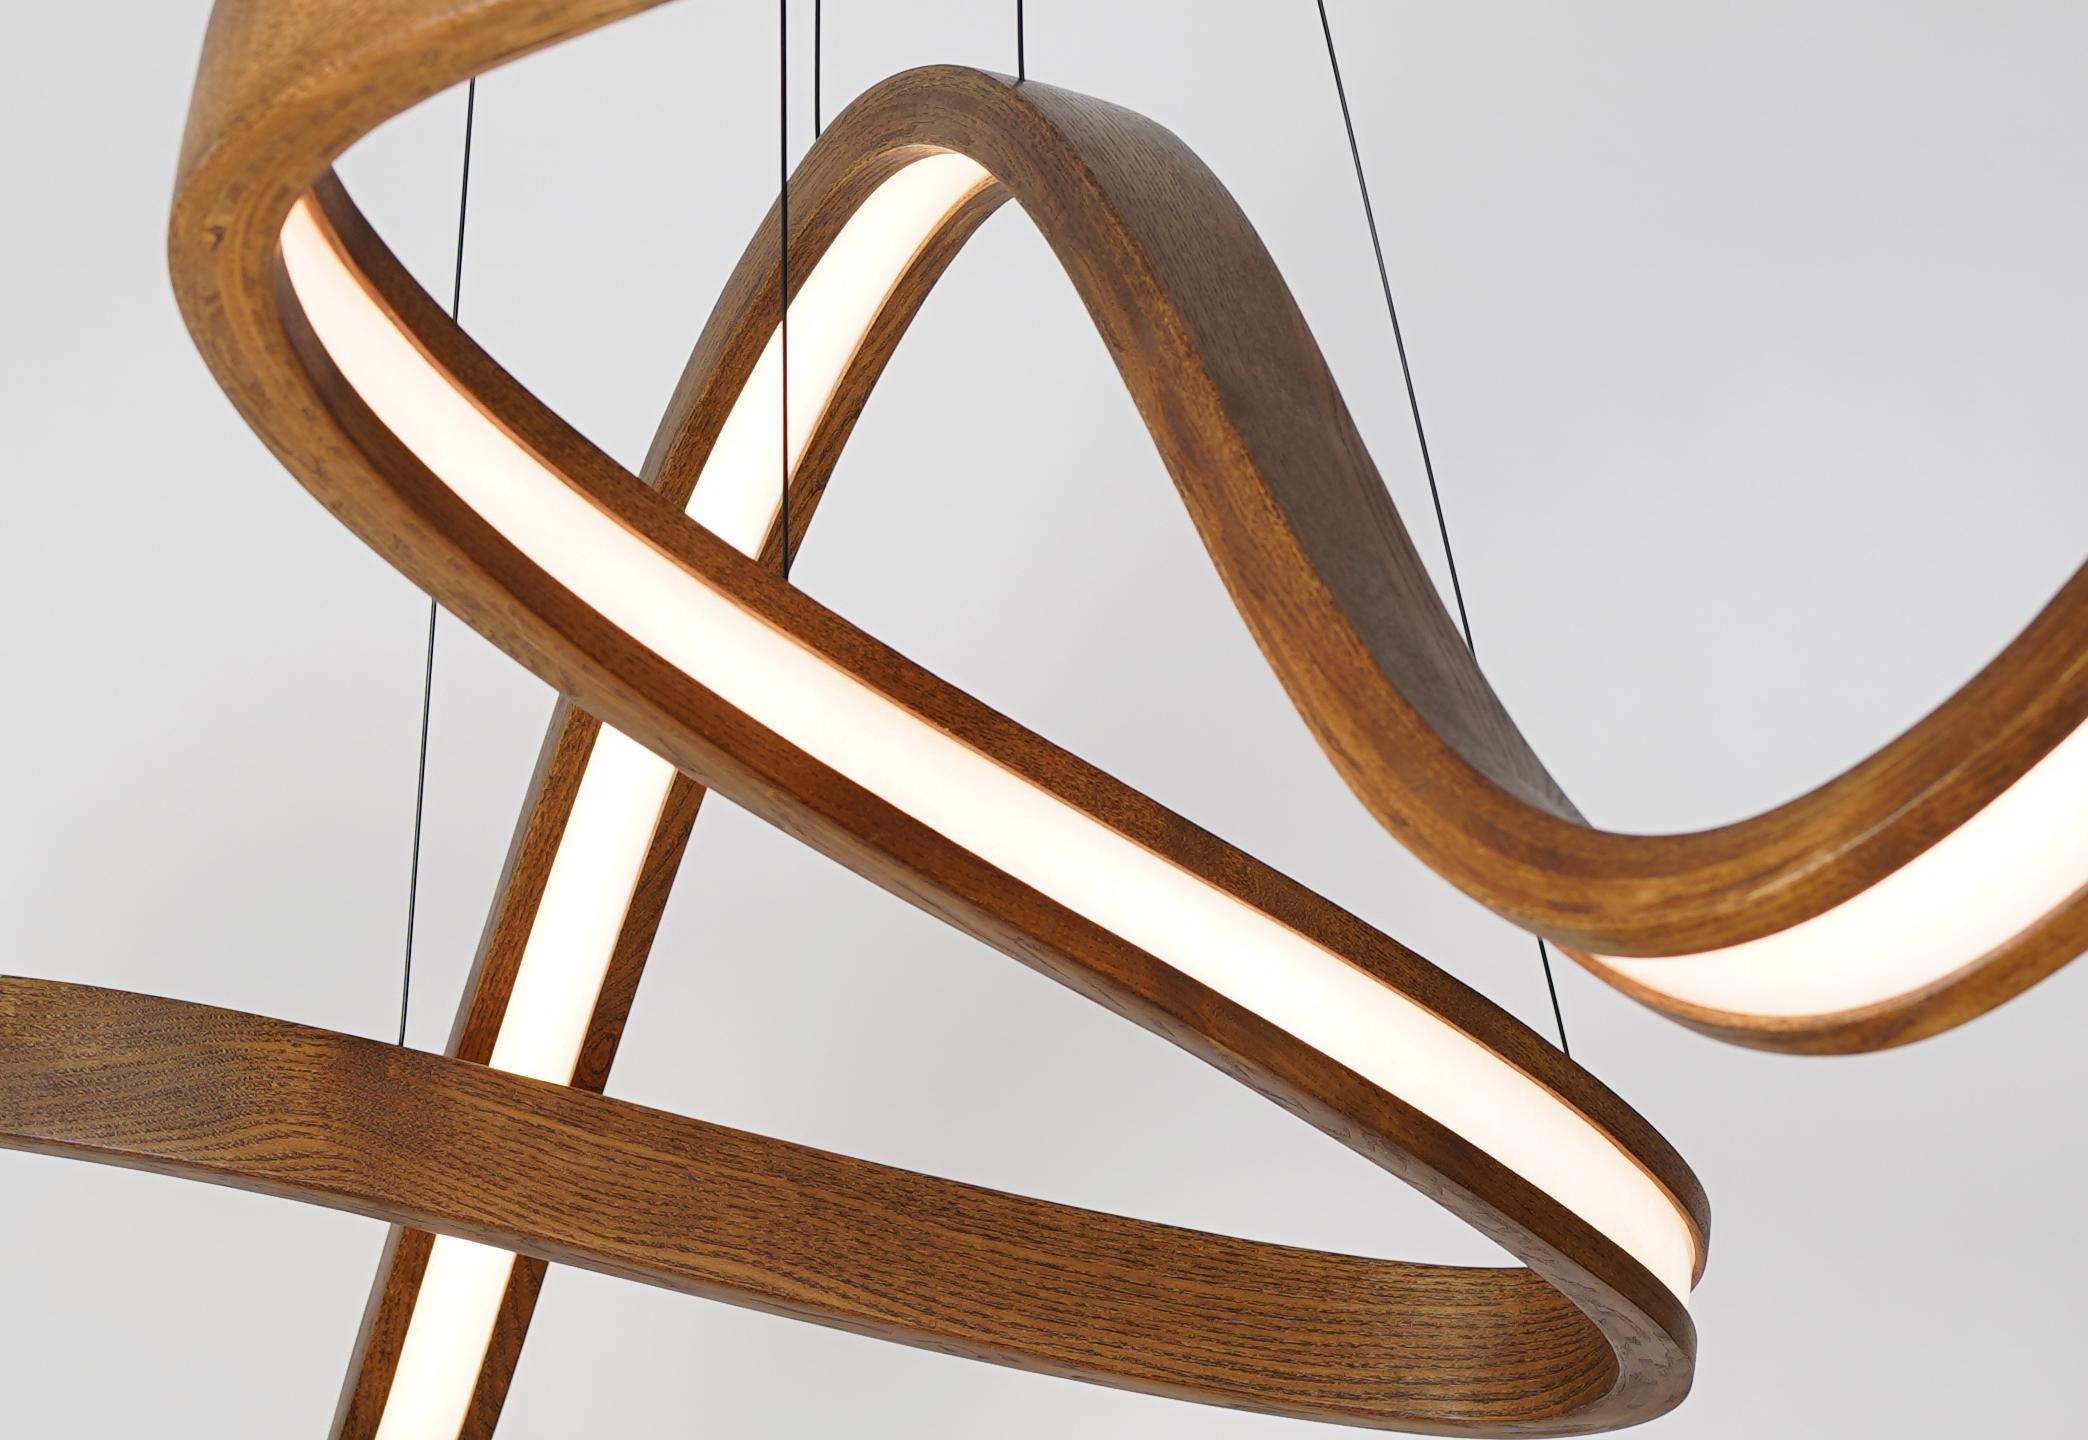 The woven is a independent modular freeform pendant formed from wood, woven diffuser, and high-output dimmable LED. The independent modular nature allows for a varying number of bent forms (two, three, four, etc.) to interwoven together but remain